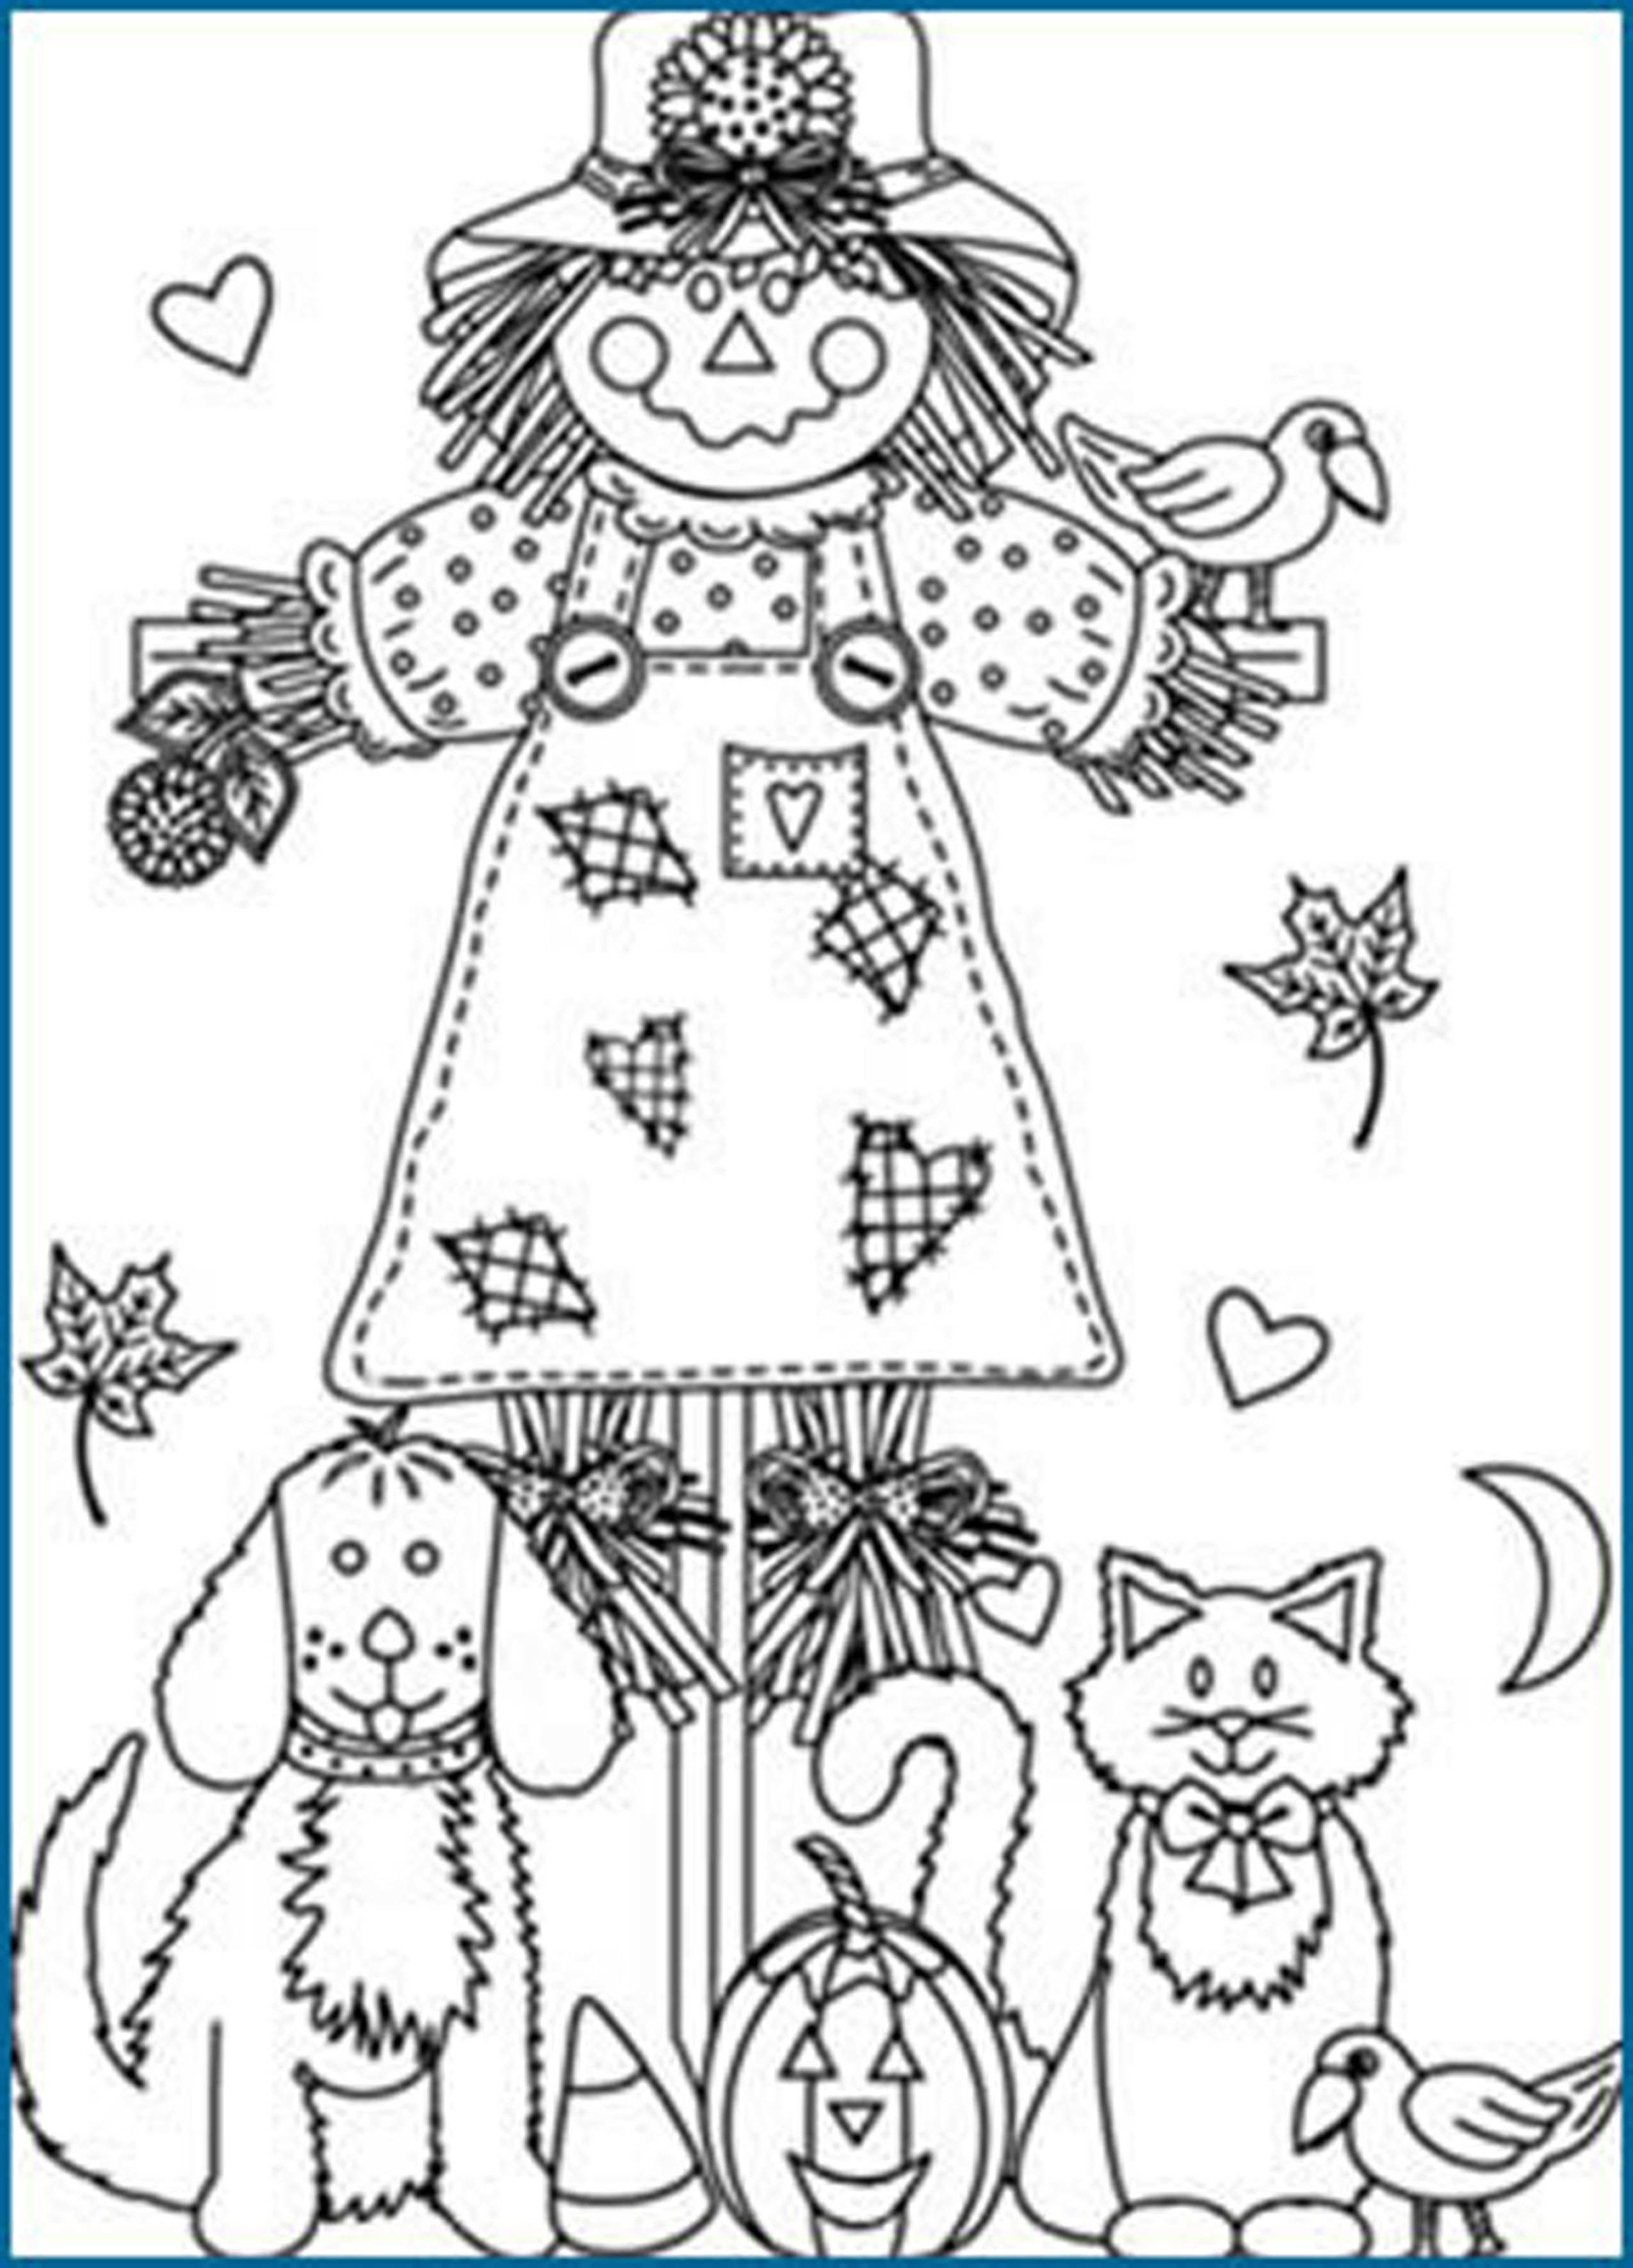 Printable Fall Coloring Pages Leaves Fall Printable Coloring Pages ...